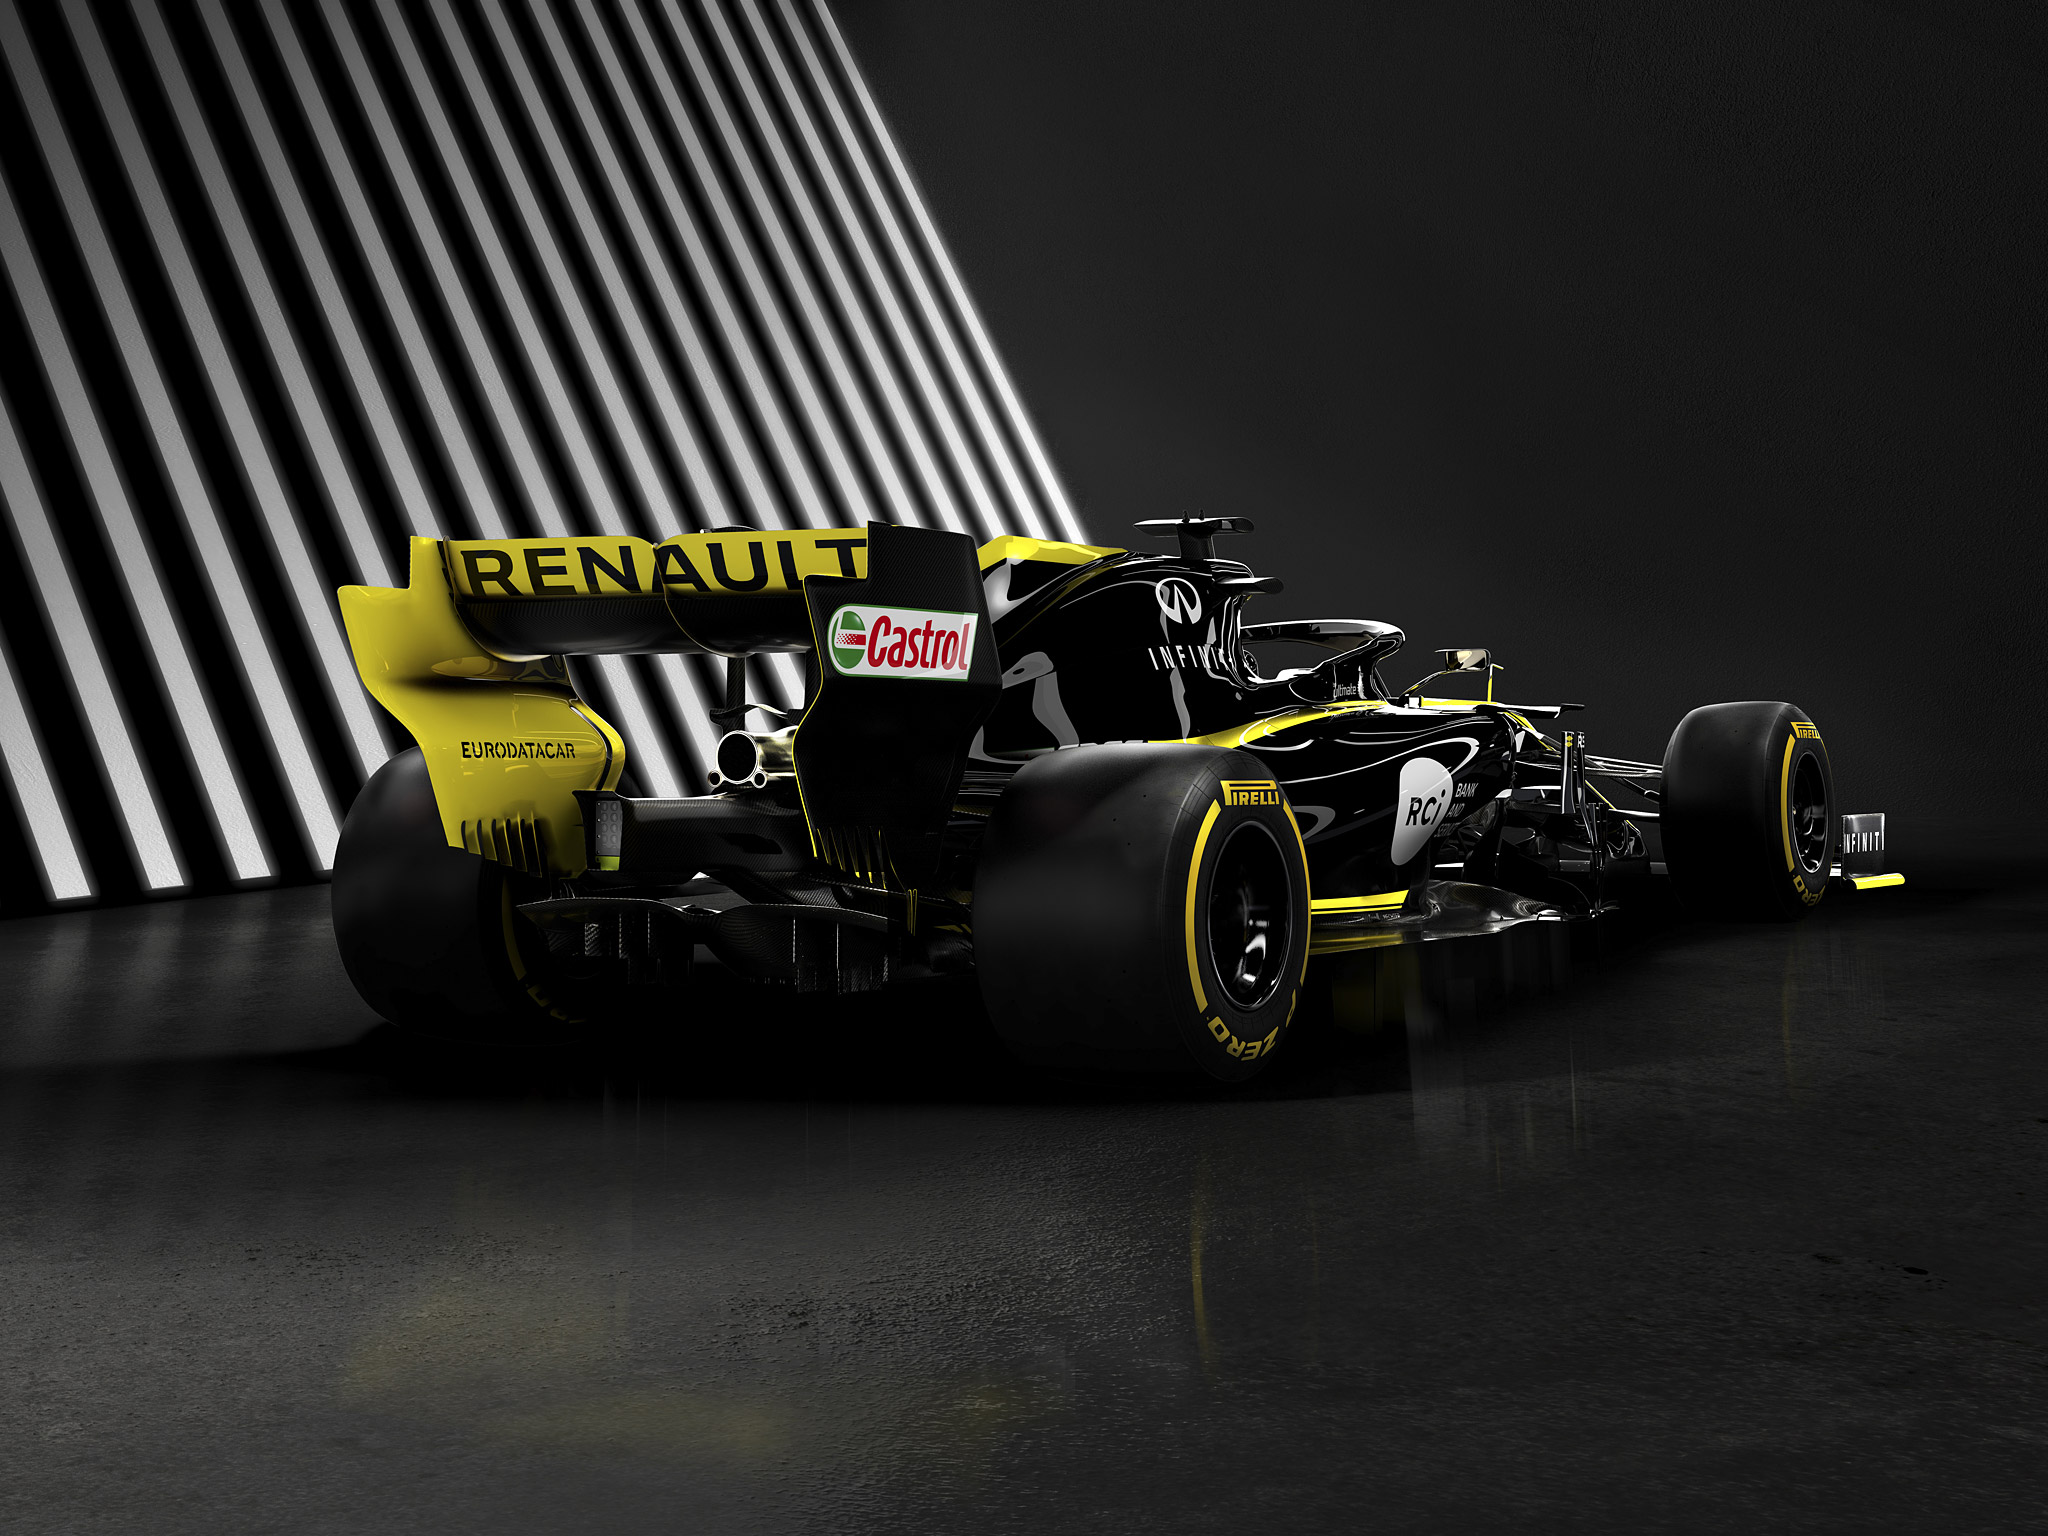 General 2048x1536 renault r.s.19 Formula 1 car yellow Renault yellow cars race cars racing 2019 (year) formula cars livery French Cars